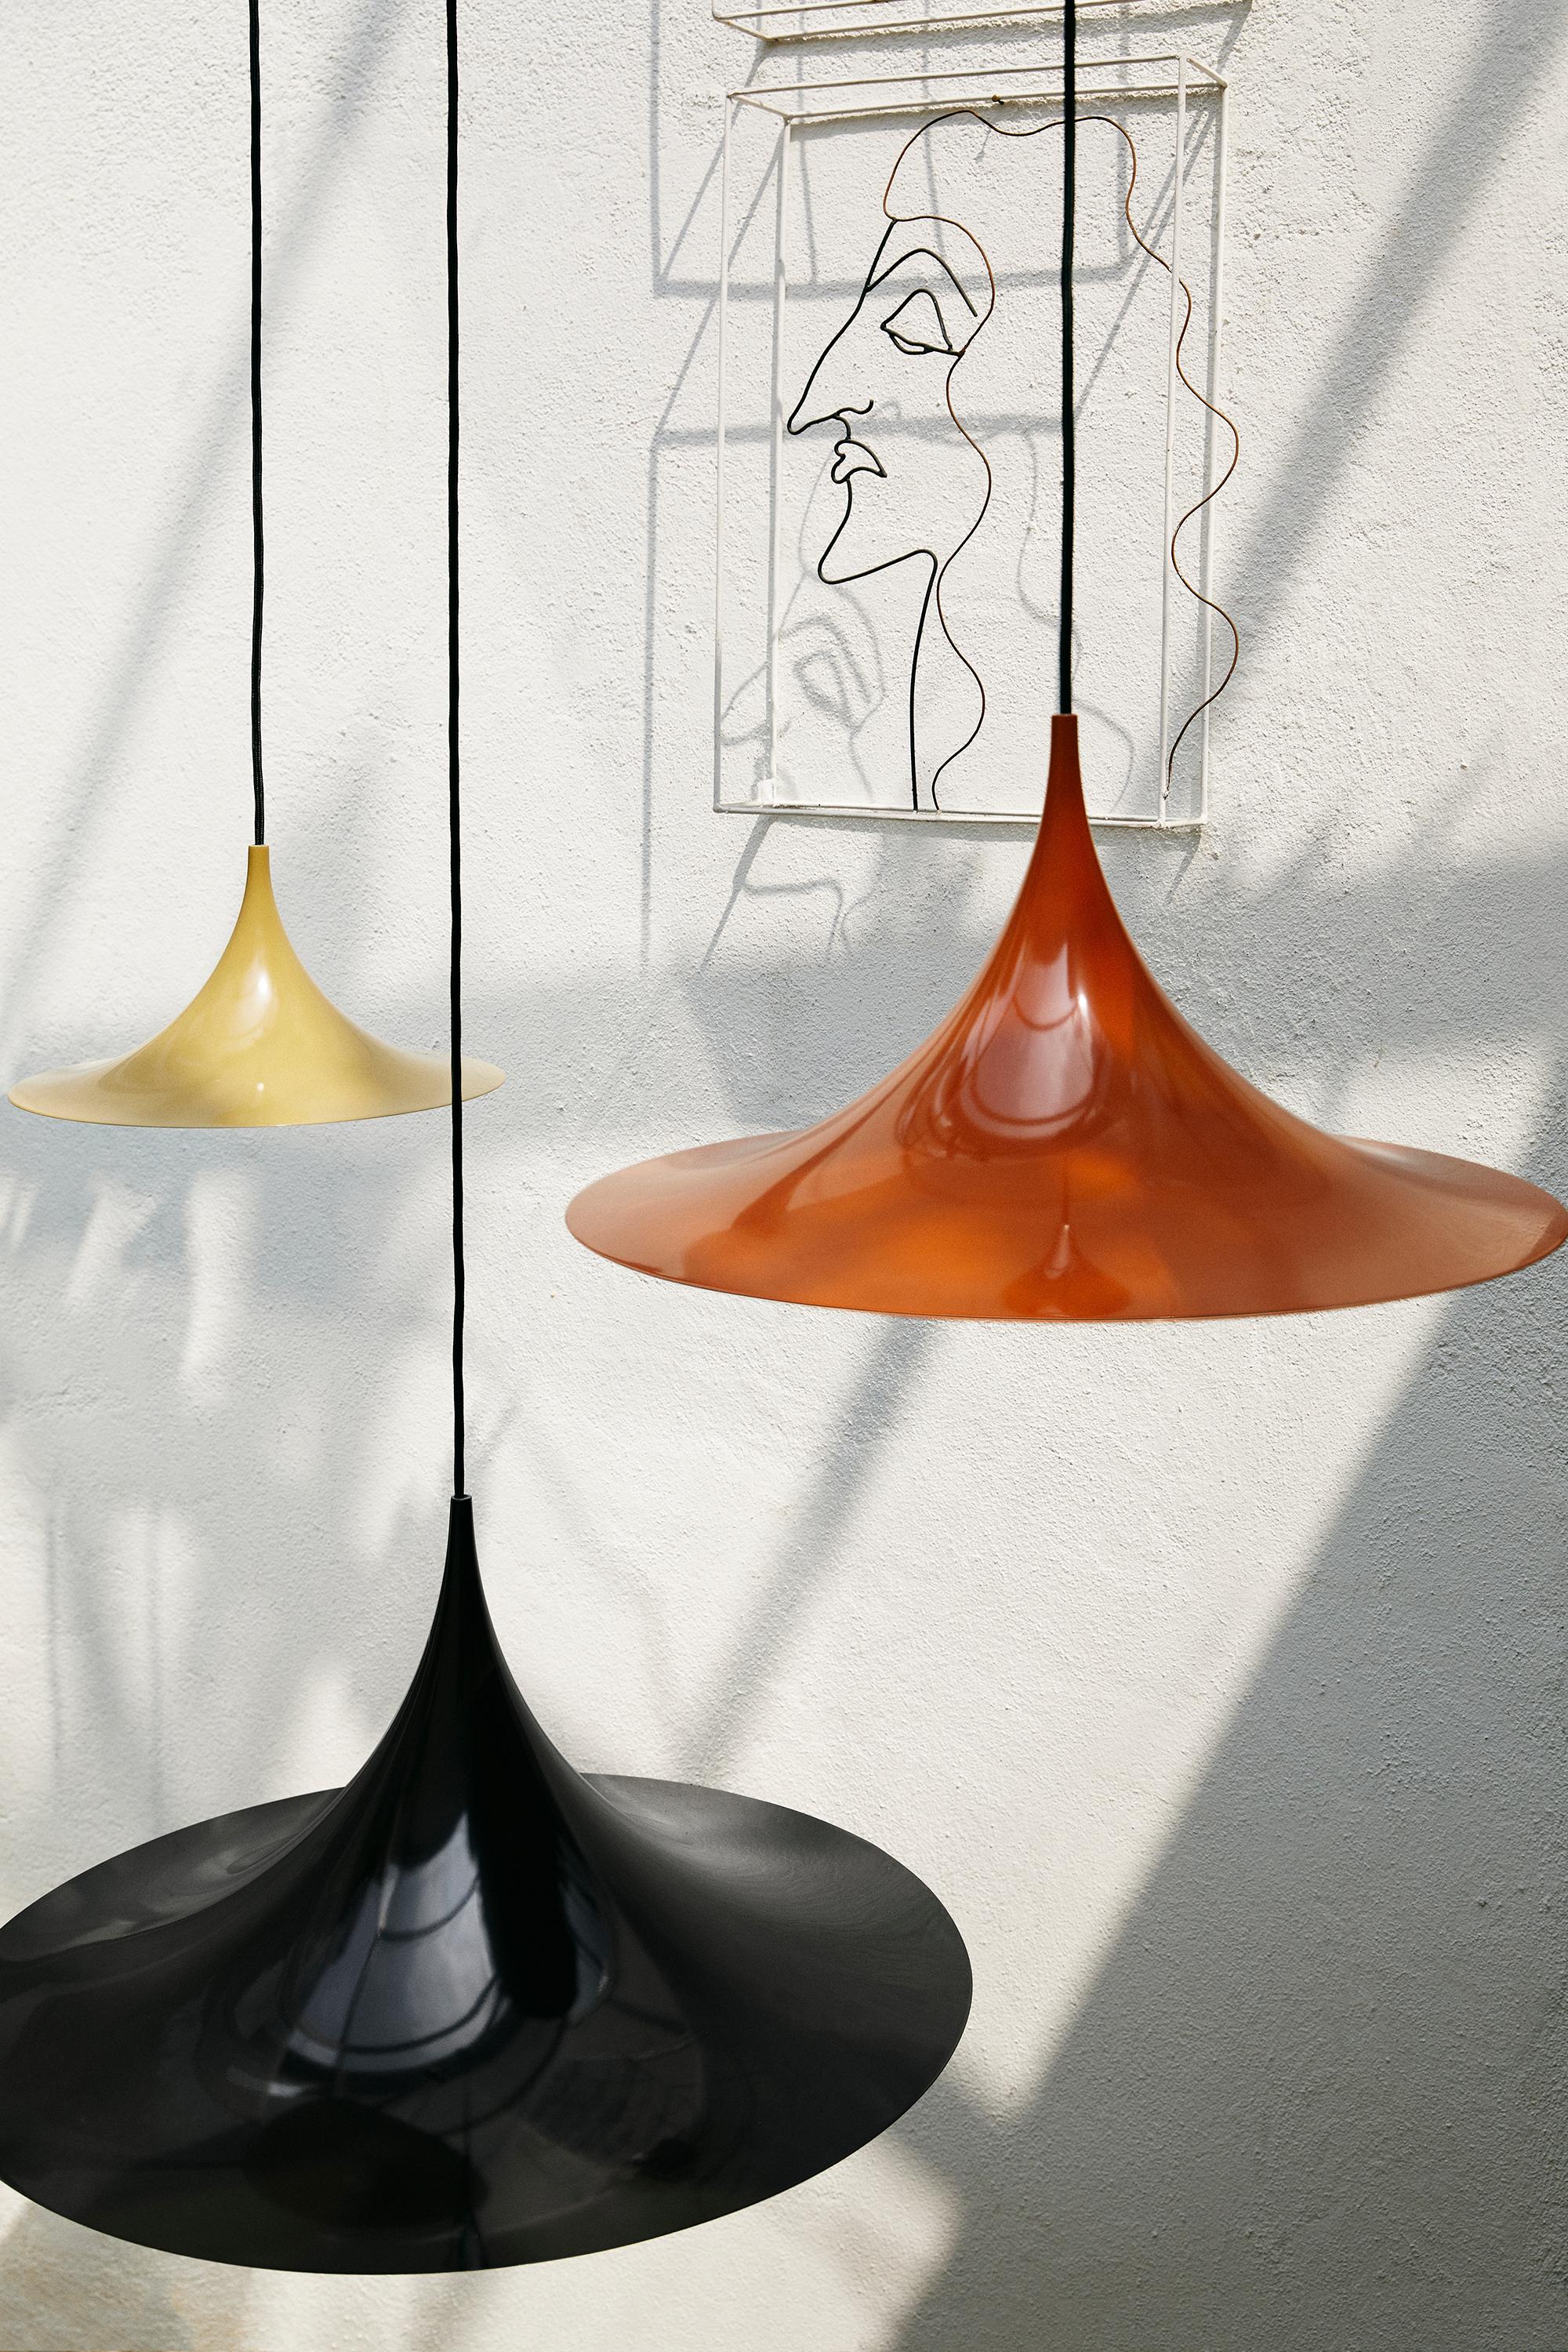 Bonderup And Thorup 'Semi' Pendant in Dark Cocoa.

Designed in 1968 by Claus Bonderup and Torsten Thorup, this authorized re-edition by GUBI of Denmark meticulously reproduces their work with great attention to detail and materials faithful to the